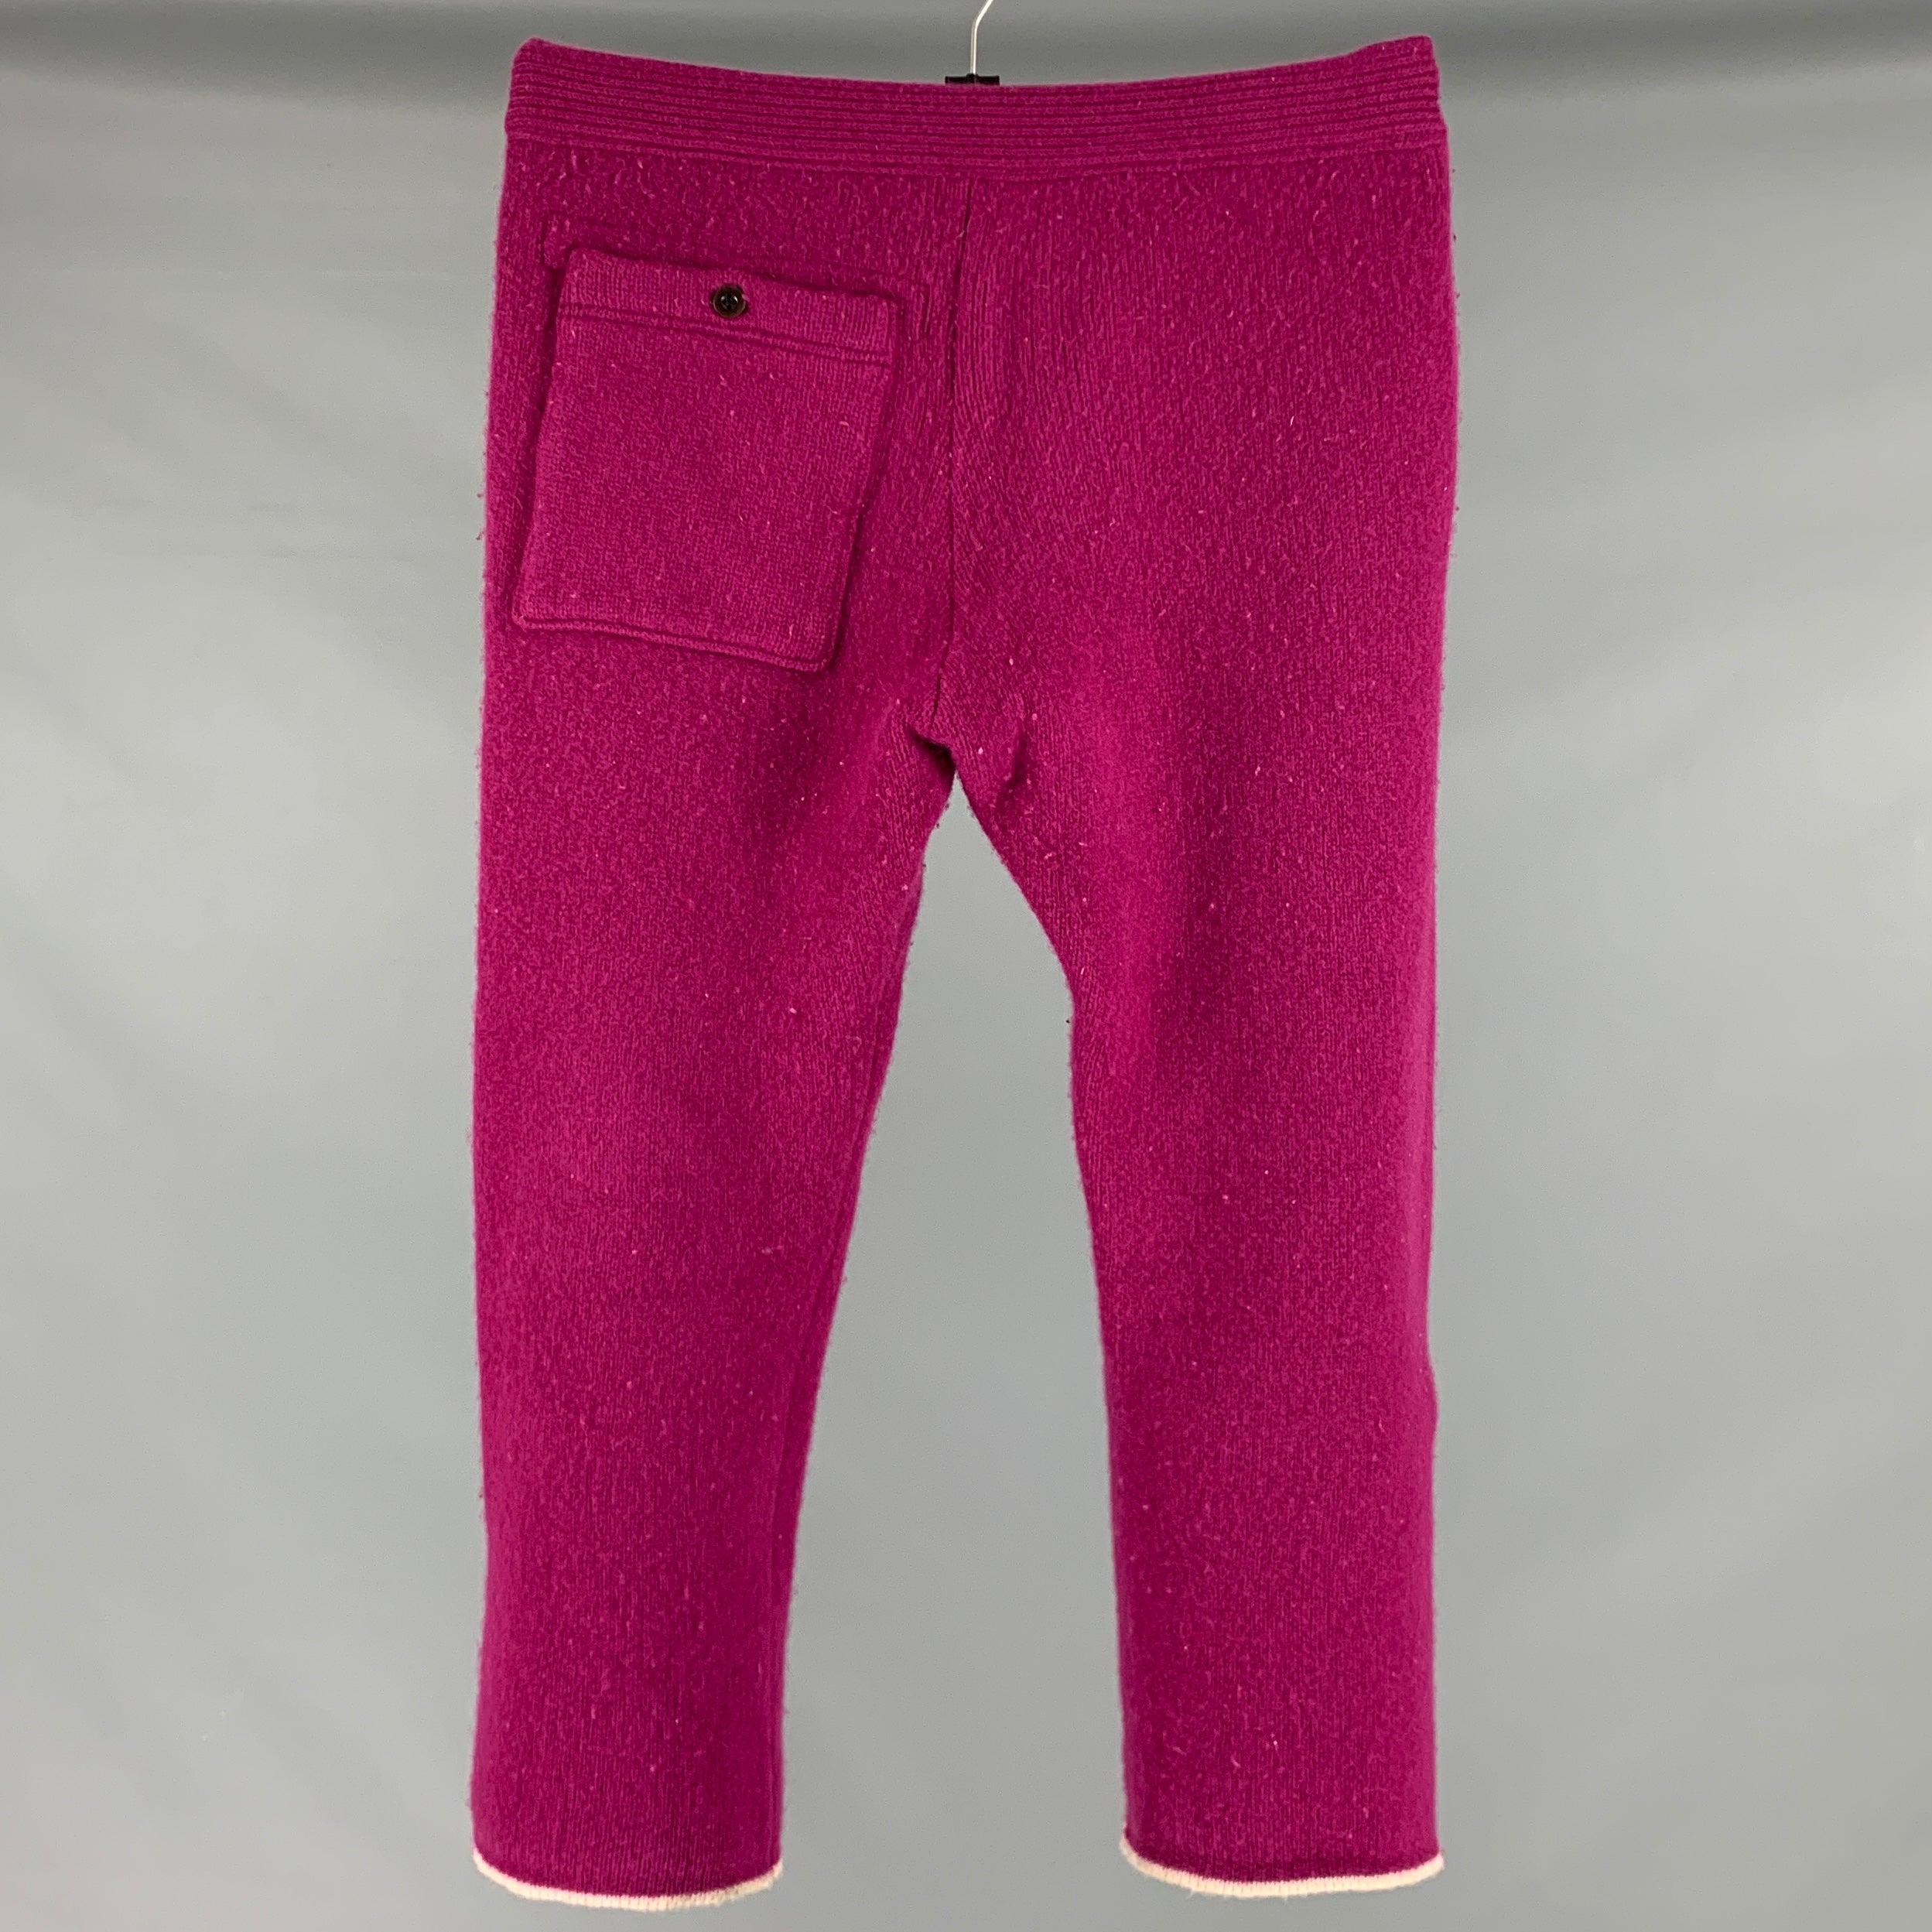 TS(S) casual pants in a purple wool blend knit featuring a ribbed style, contrast cream trim, and drawstring waist. Made in Japan.Good Pre-Owned Condition. Moderate signs of wear and pilling. 

Marked:   M 

Measurements: 
  Waist: 32 inches Rise: